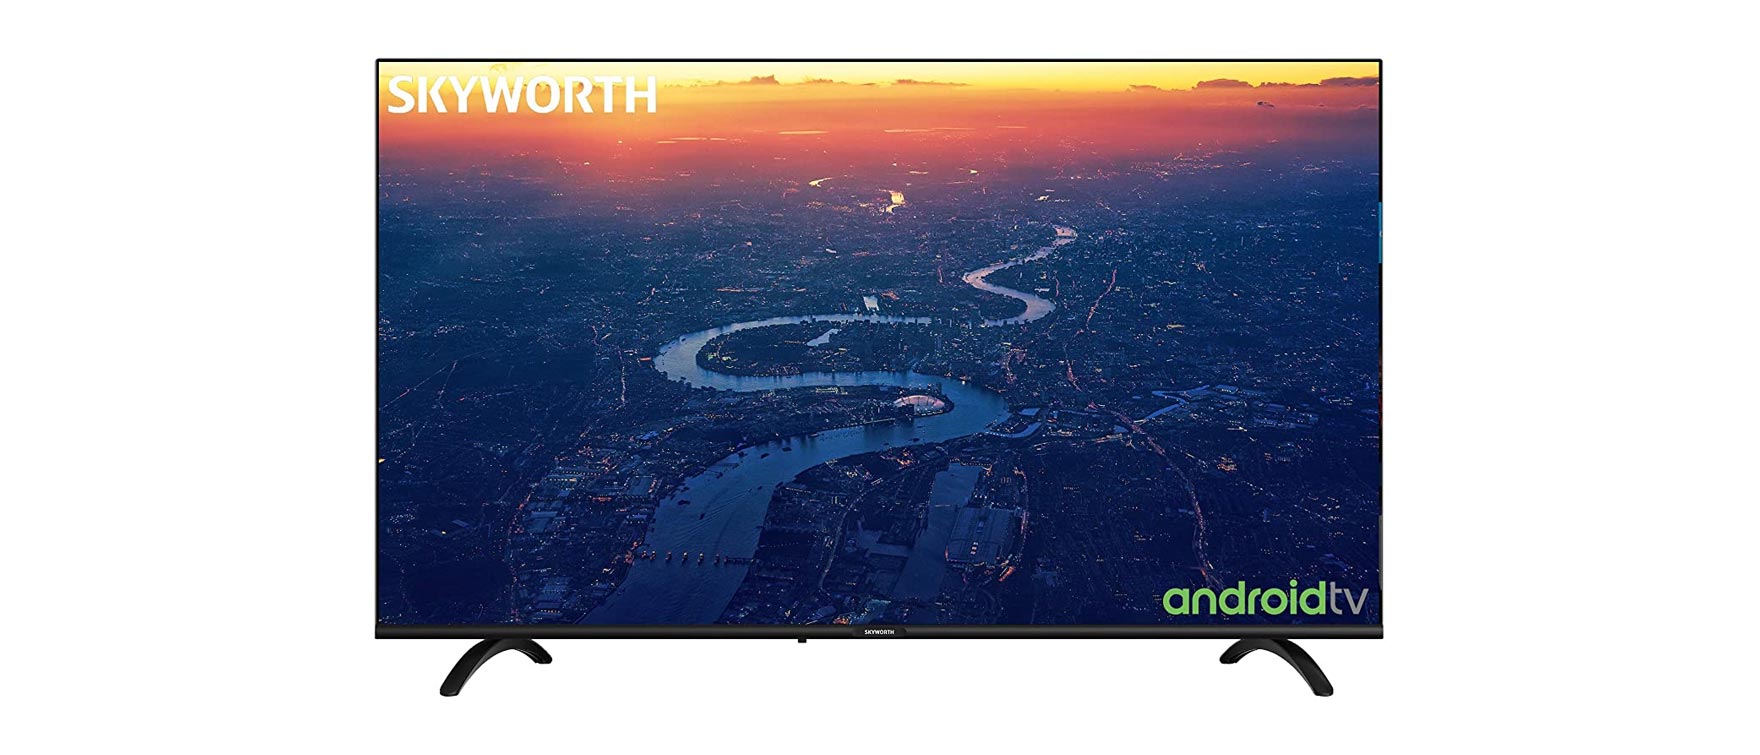 7. Best in Android TV: SKYWORTH E20300 32